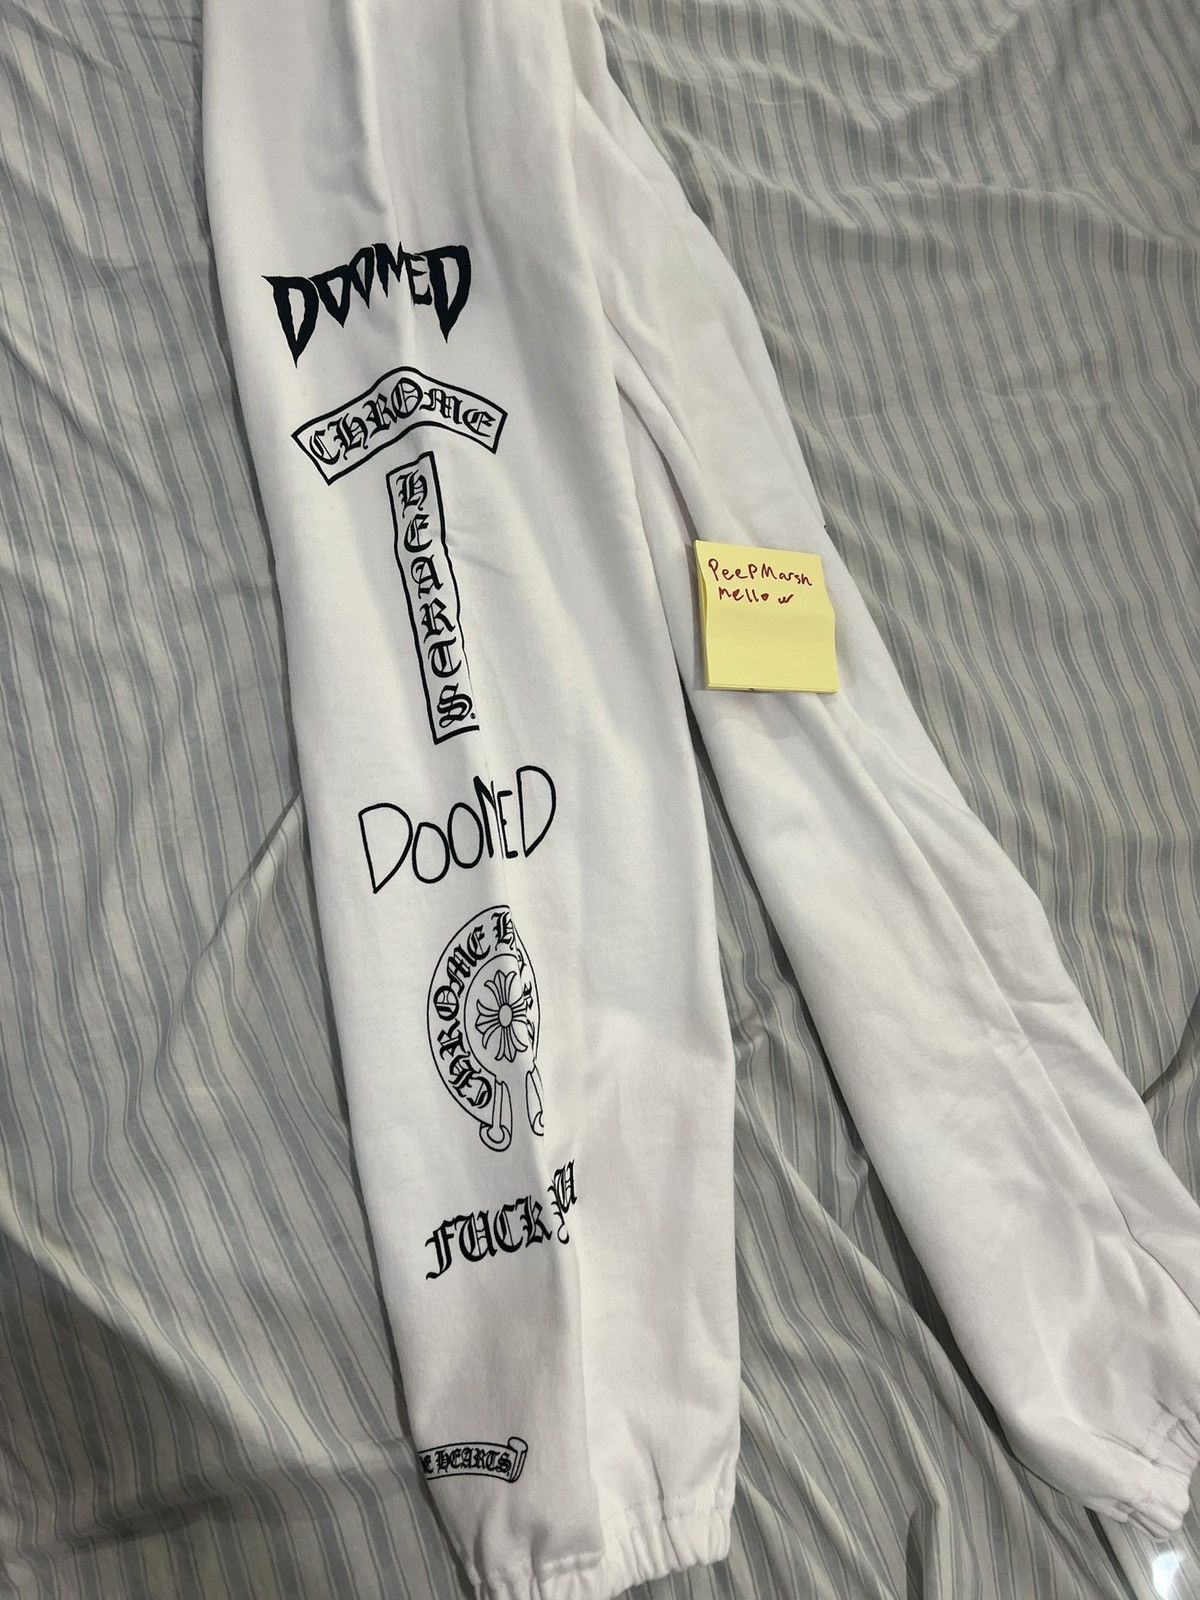 Chrome Hearts Chrome Hearts x Deadly Doll Sweatpants Size US 31 - 2 Preview